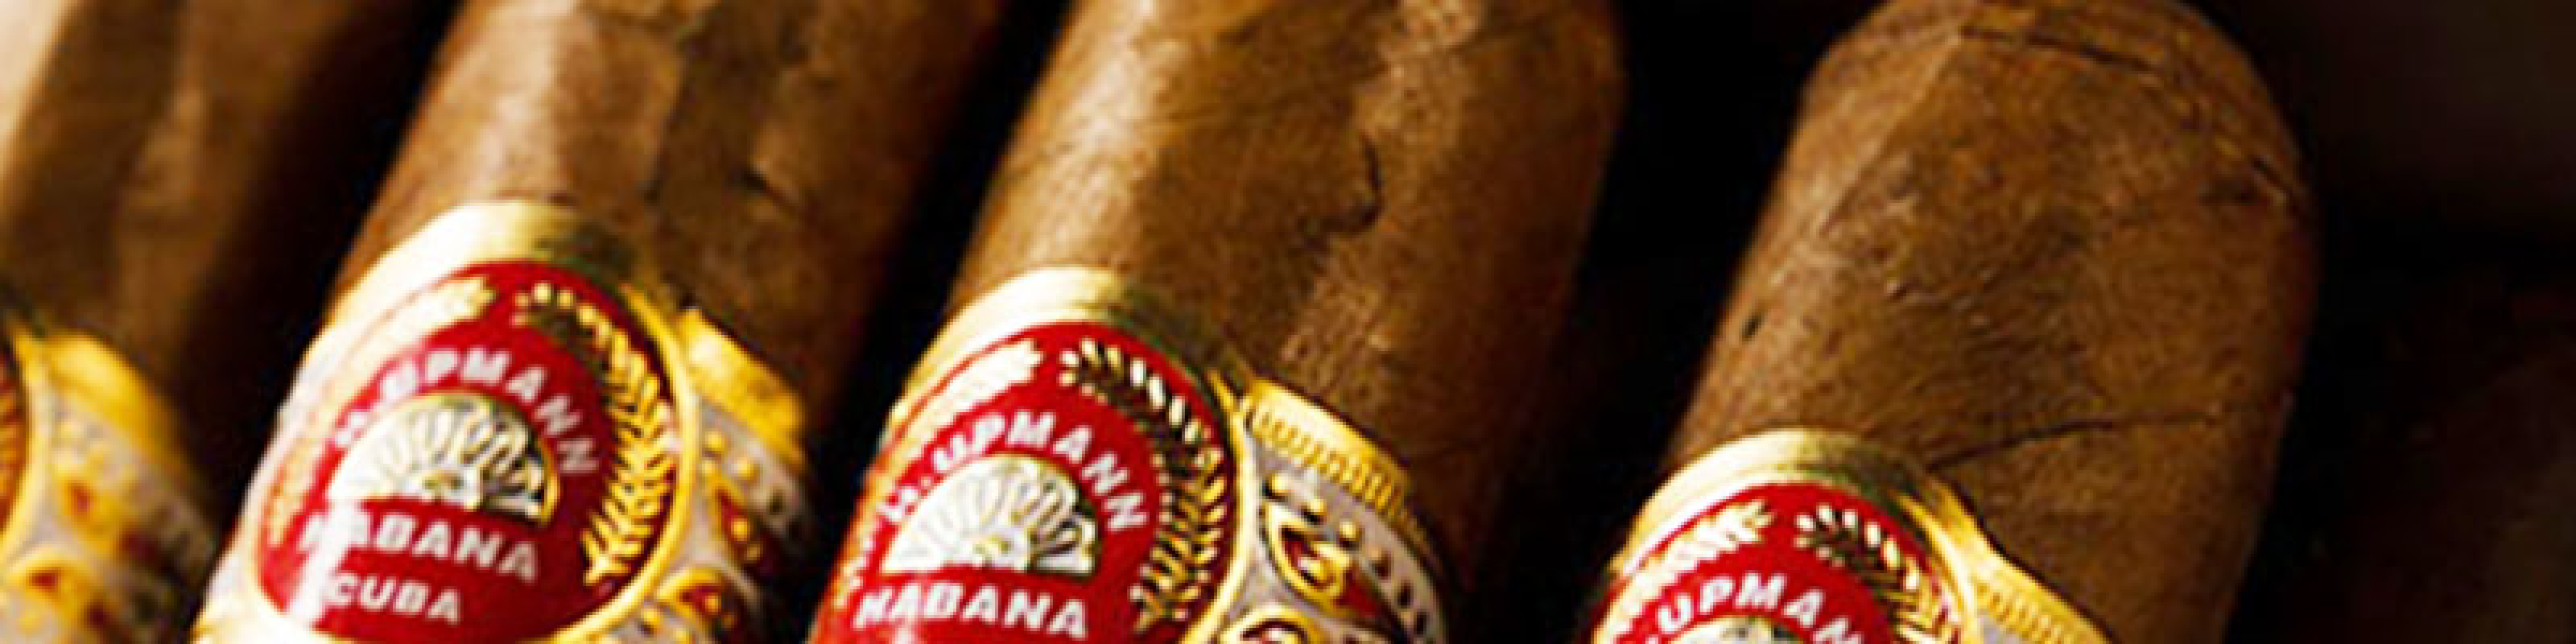 UPMANN WAS FOUNDED IN 1844 VERY SIMILAR TO THE RICH MONTECRISTO